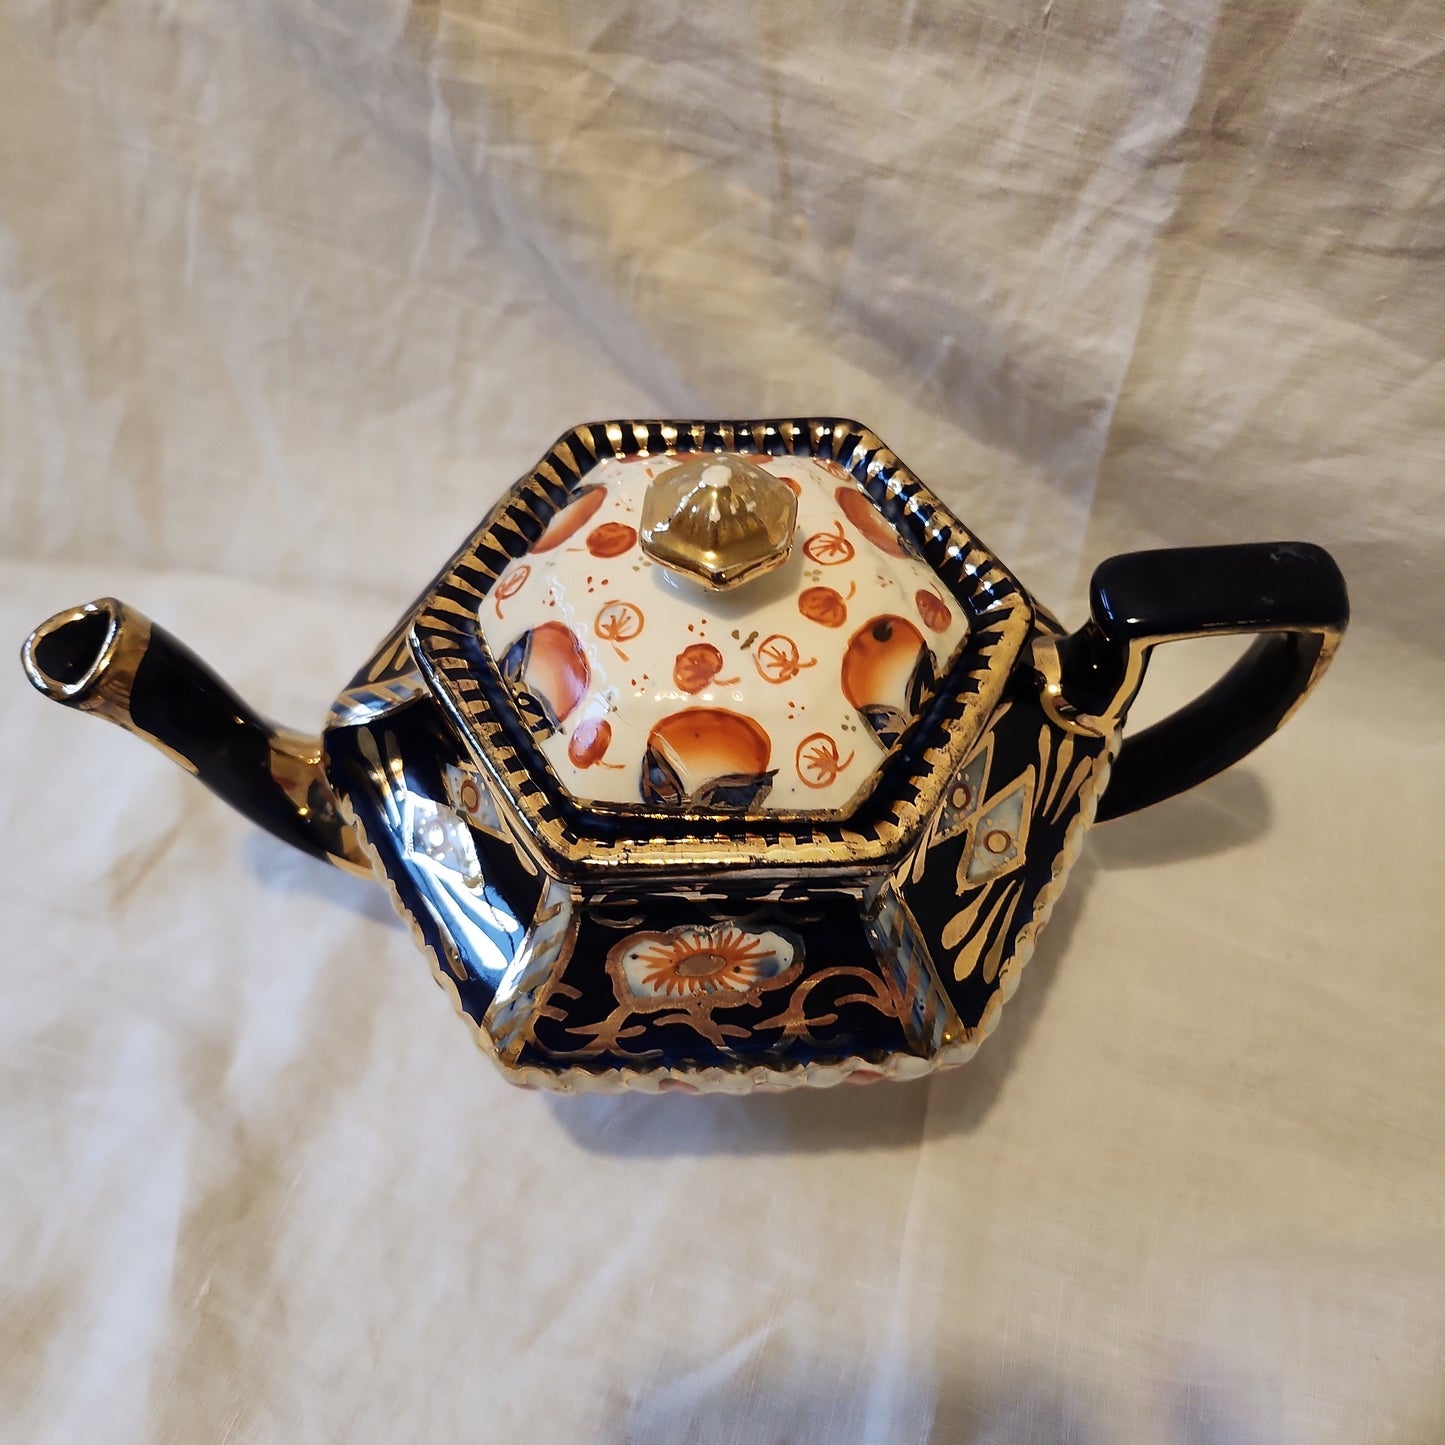 Antique Lingard Webster Imari Teapot of hexagonal form with damage. Early 20th century handpainted